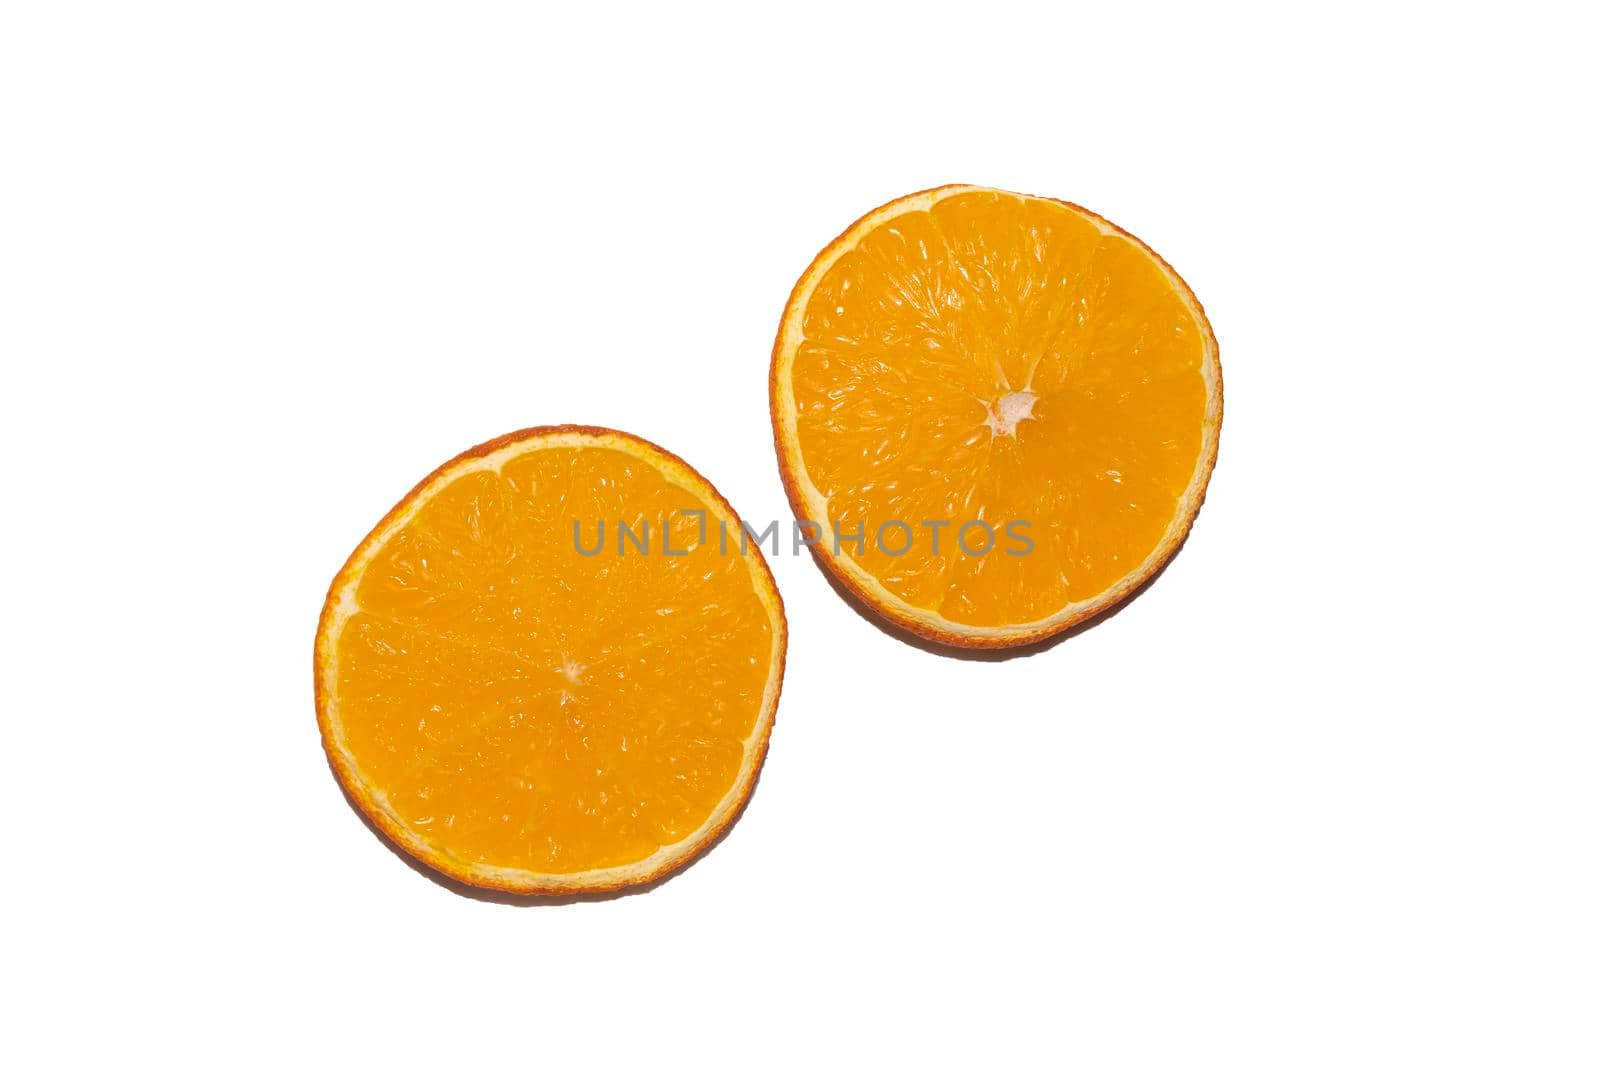 two orange slices on a white background by roman112007